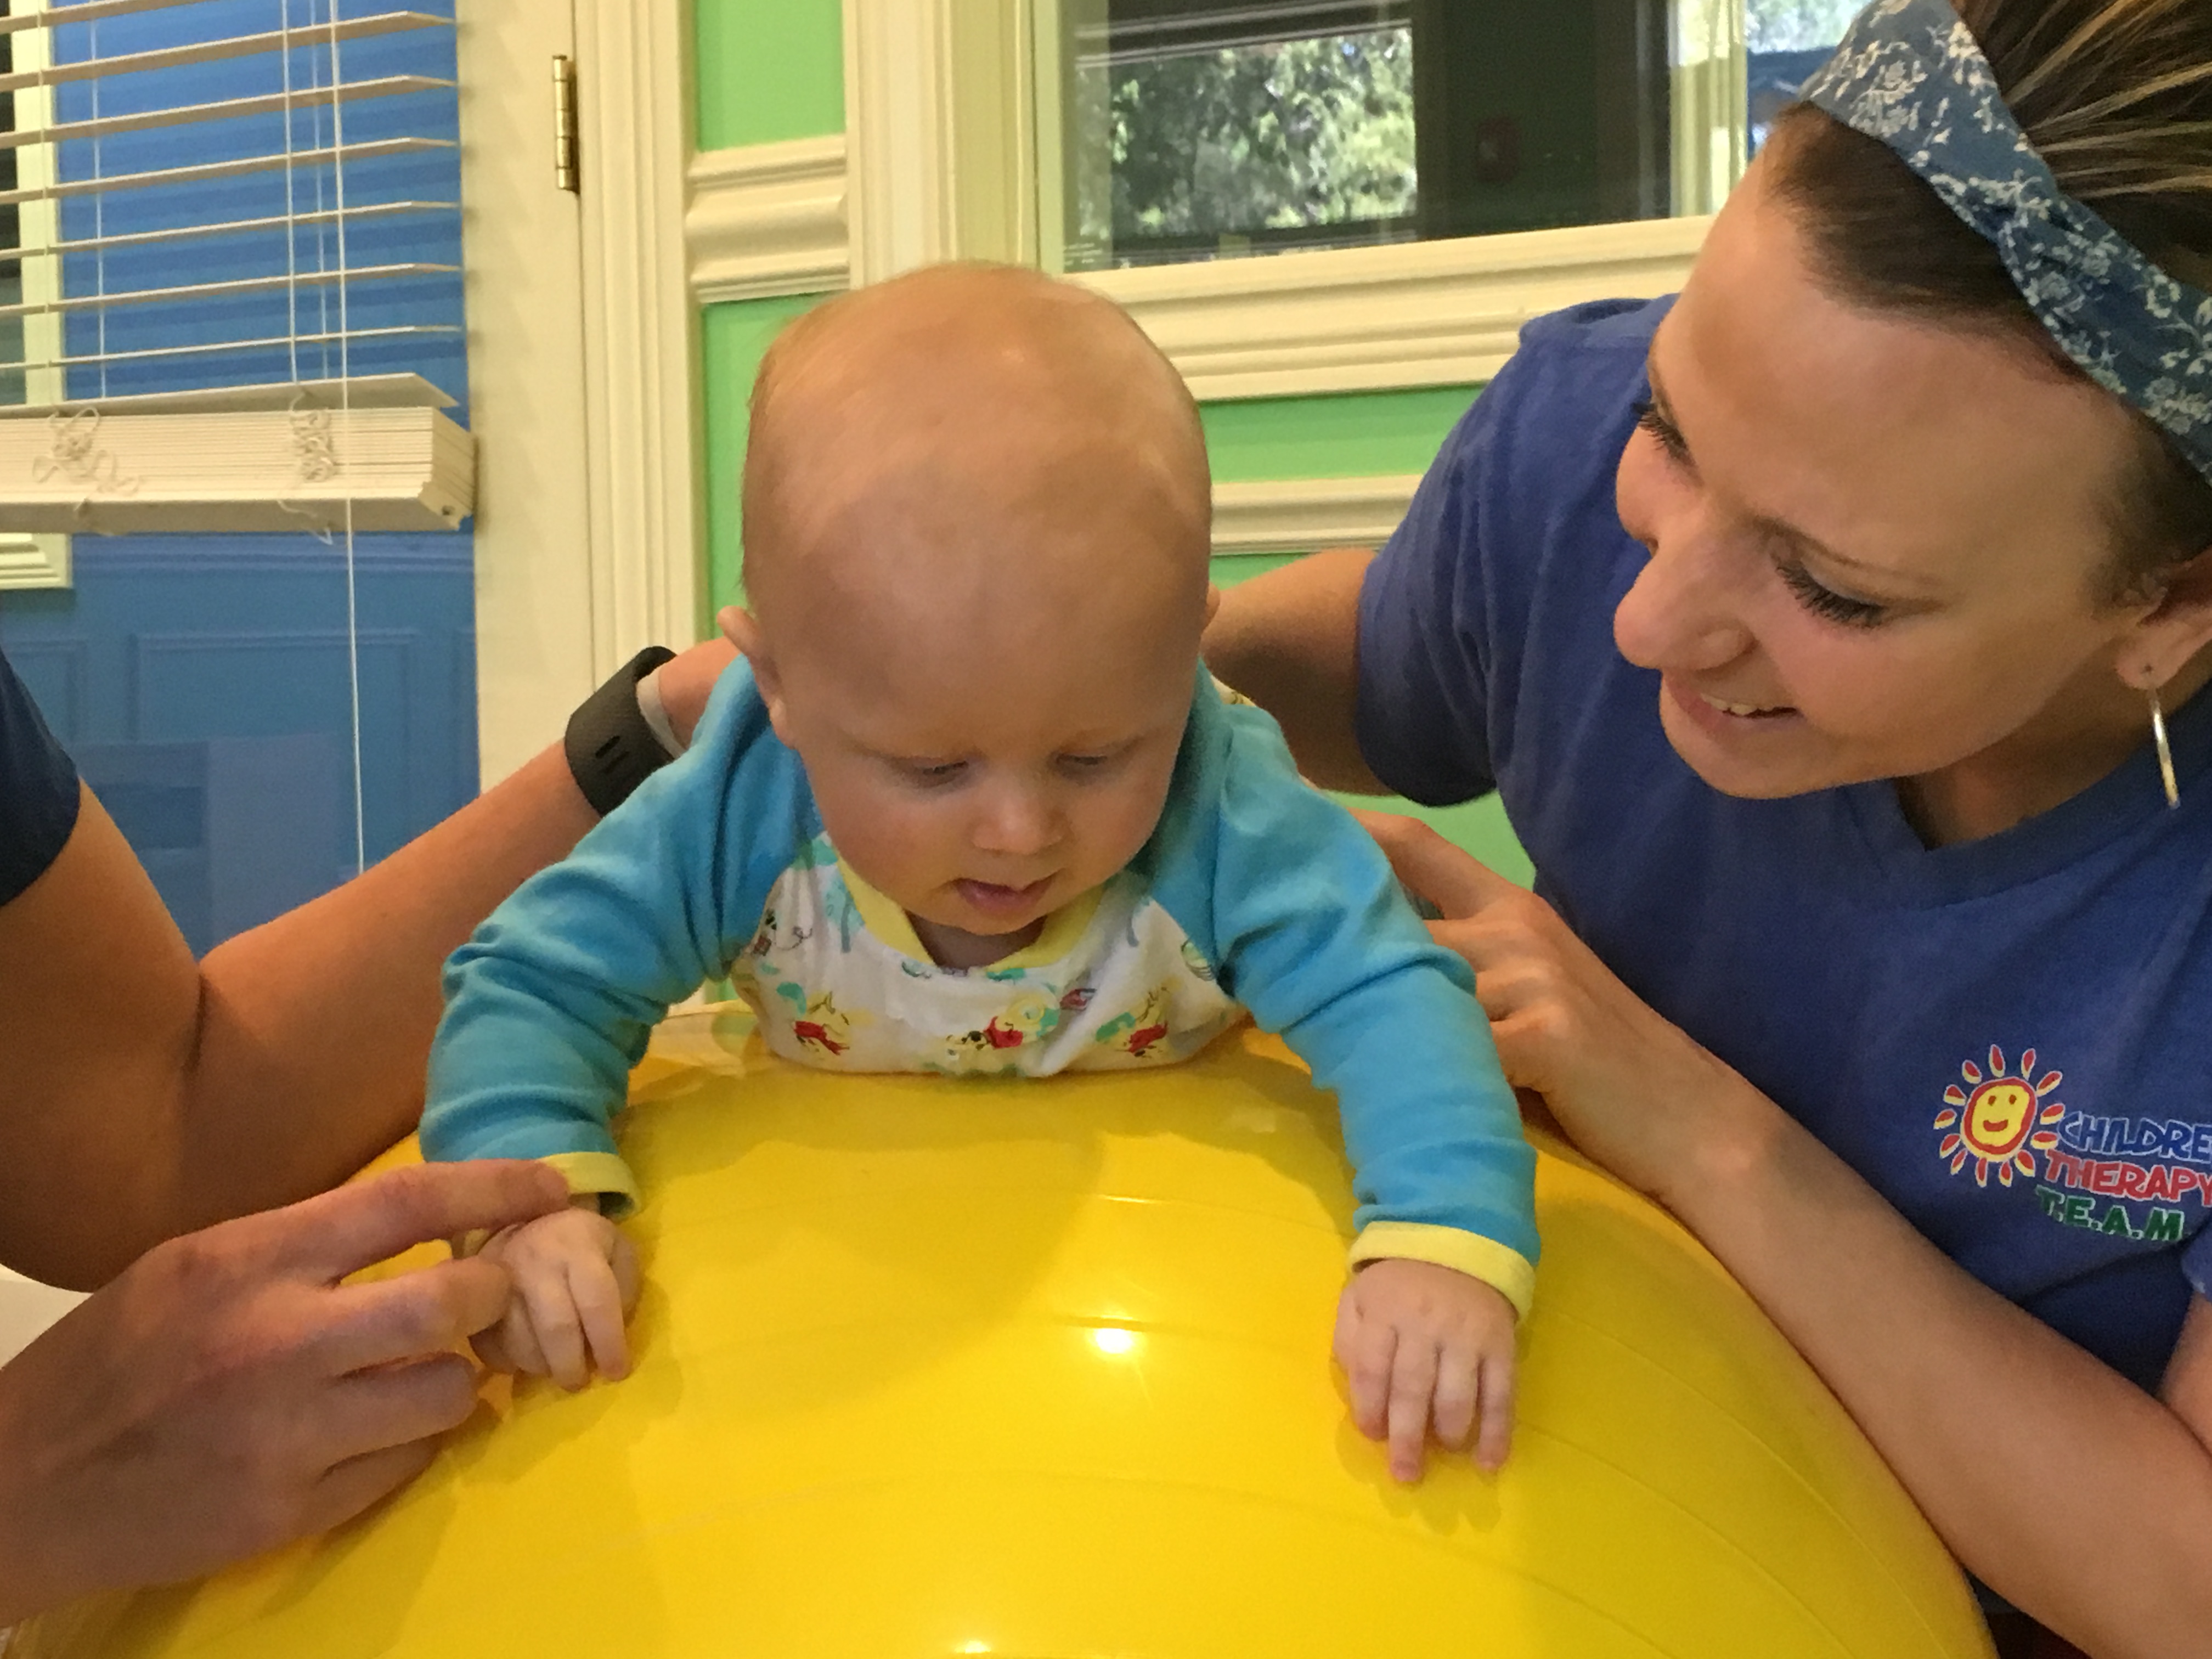 Tummy time for your baby: advice from a pediatric OT